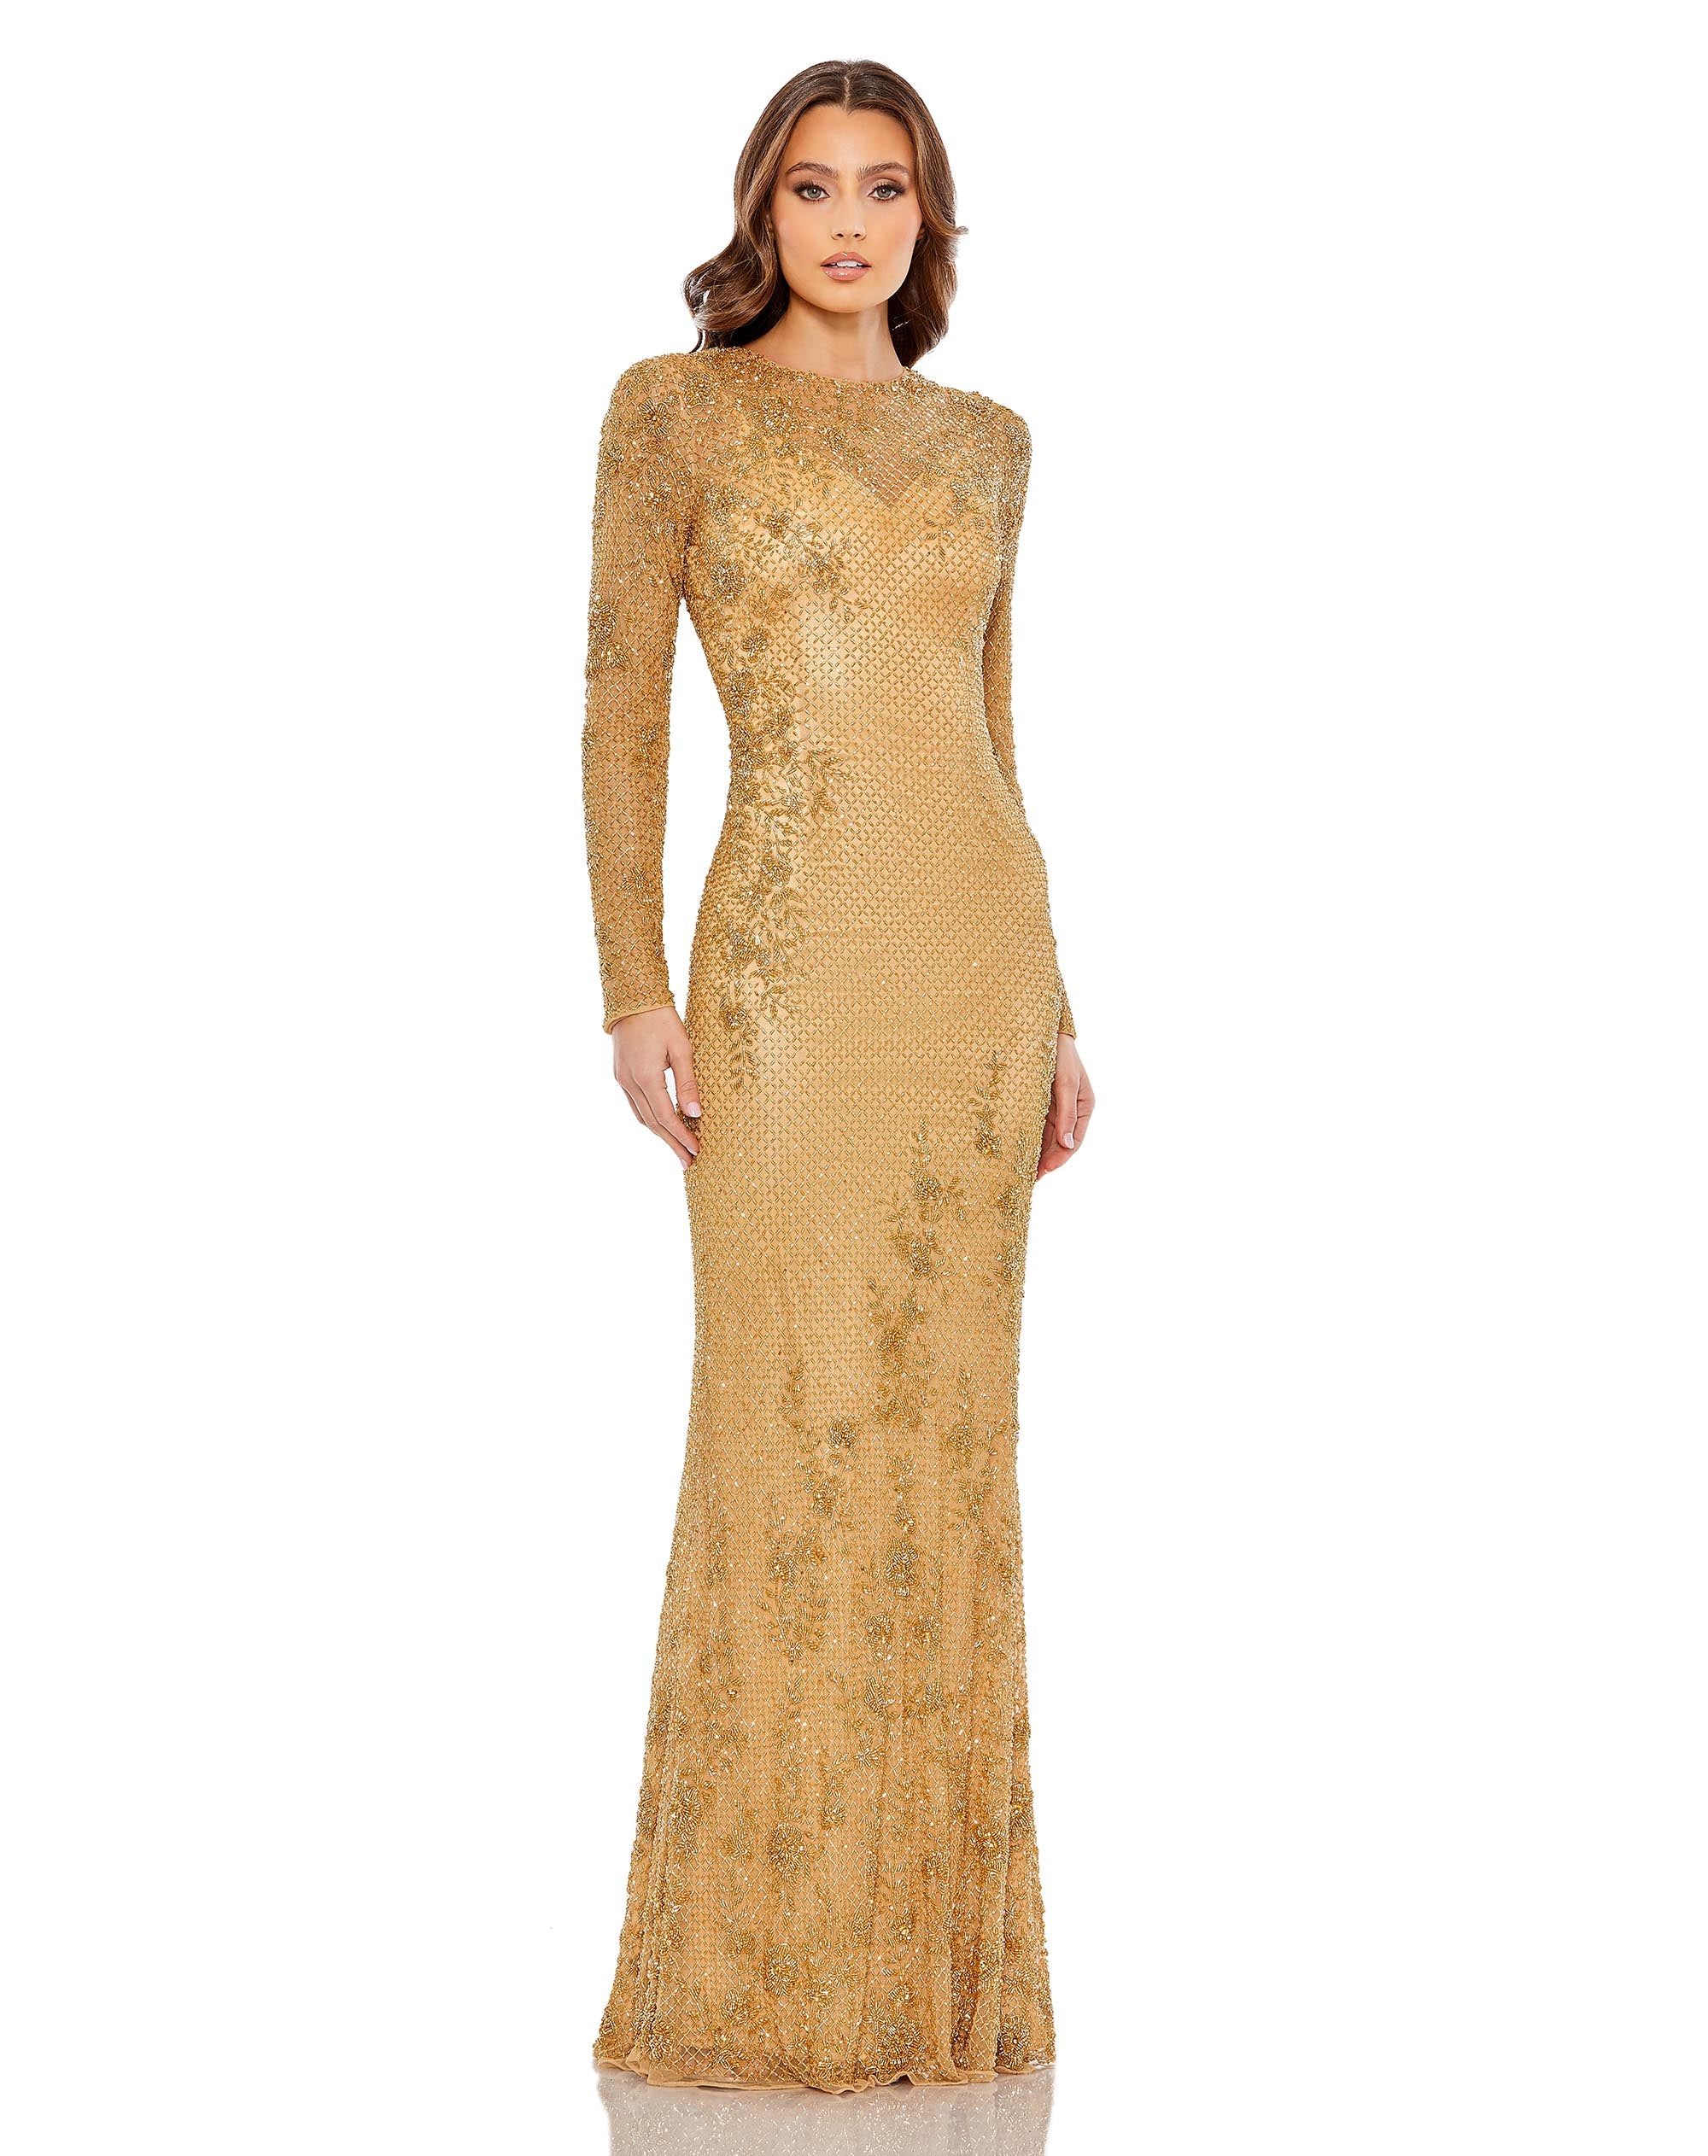 Long Sleeve Embellished Evening Gown